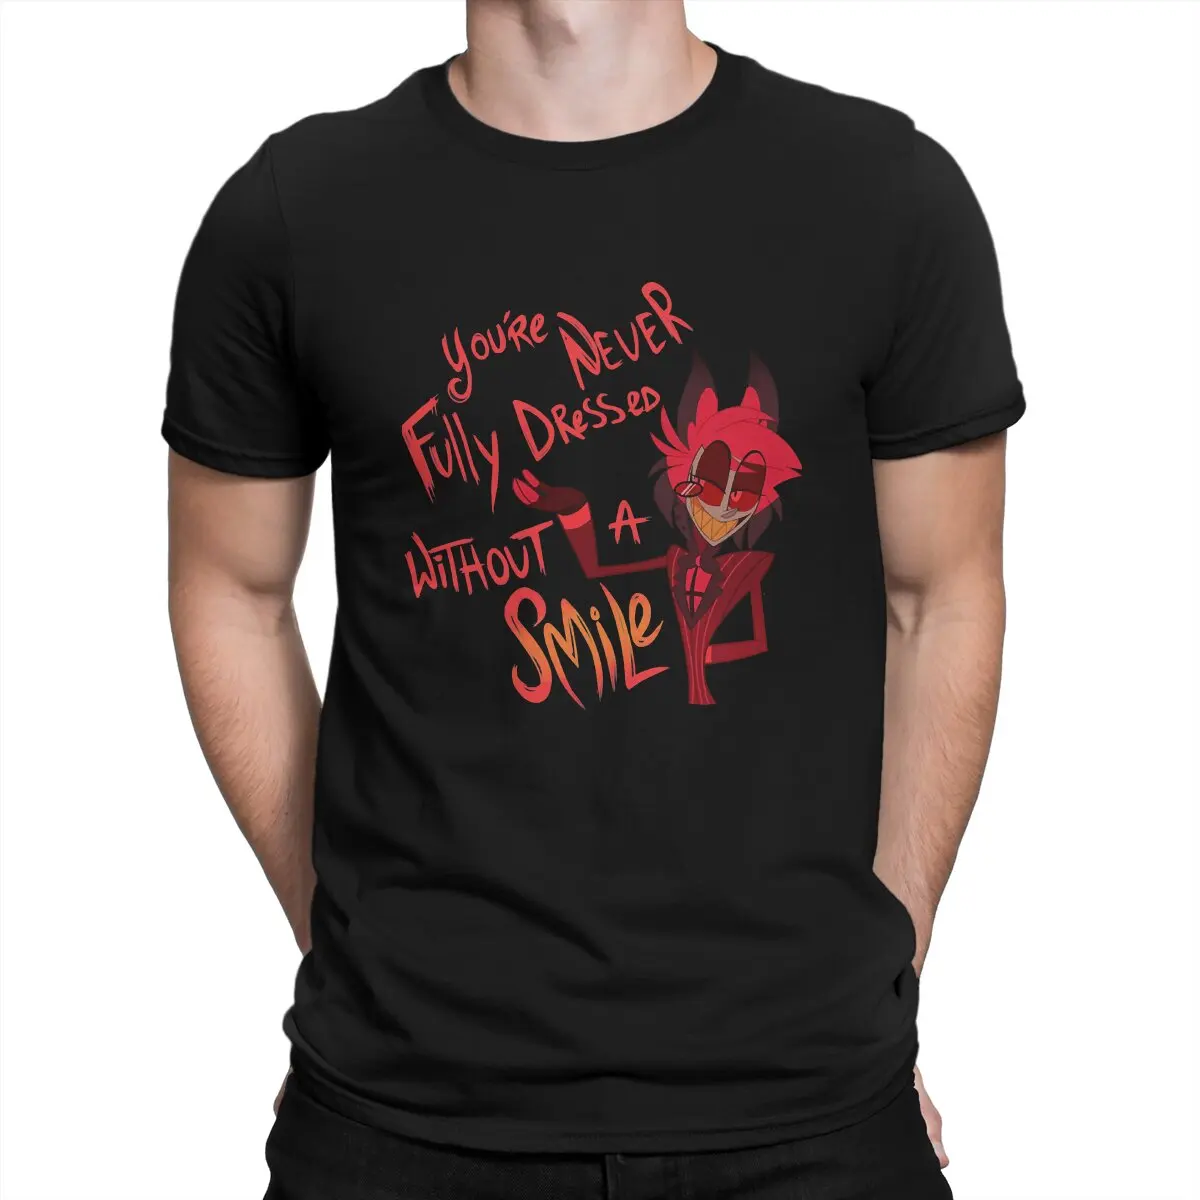 

You're Never Fully Dressed Without A Smile Special TShirt Hazbin Hotels Casual T Shirt Hot Sale T-shirt For Men Women